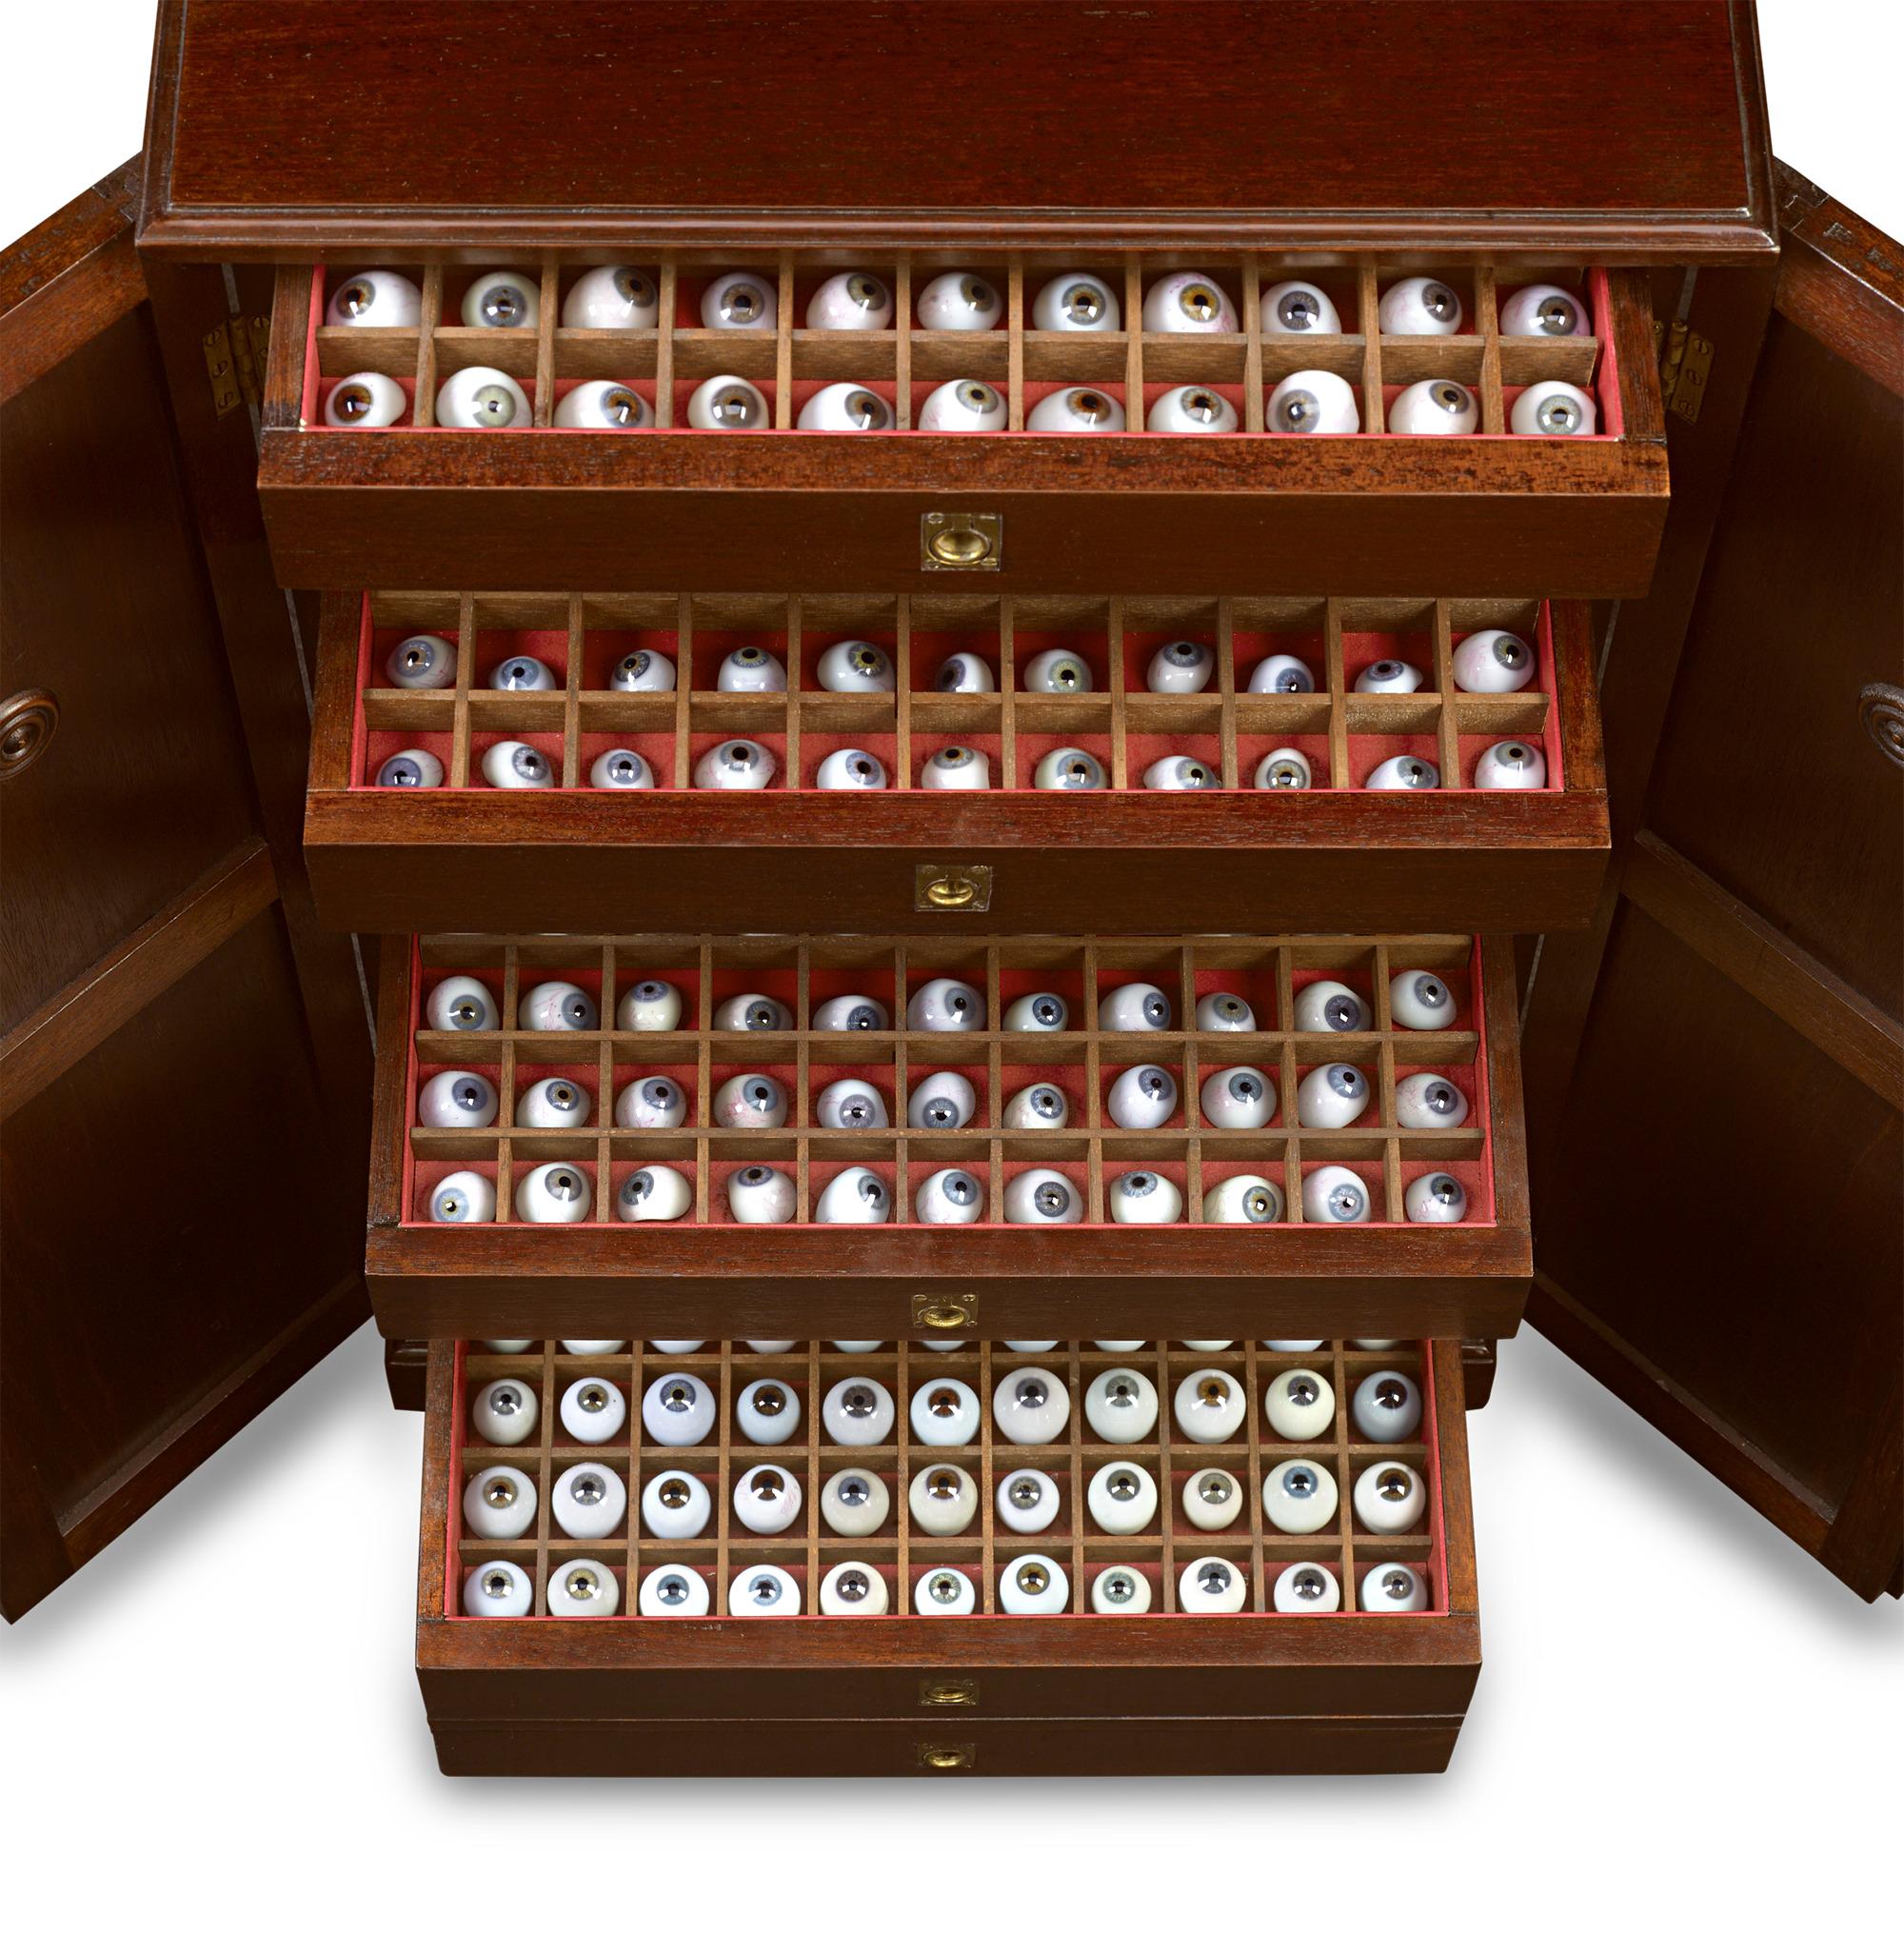 This 19th-century cabinet contains an assortment of almost 600 individual hand-blown glass eyes. A collection of this magnitude would have resided in the office of a prominent French ocularist, someone who specialized in crafting and fitting